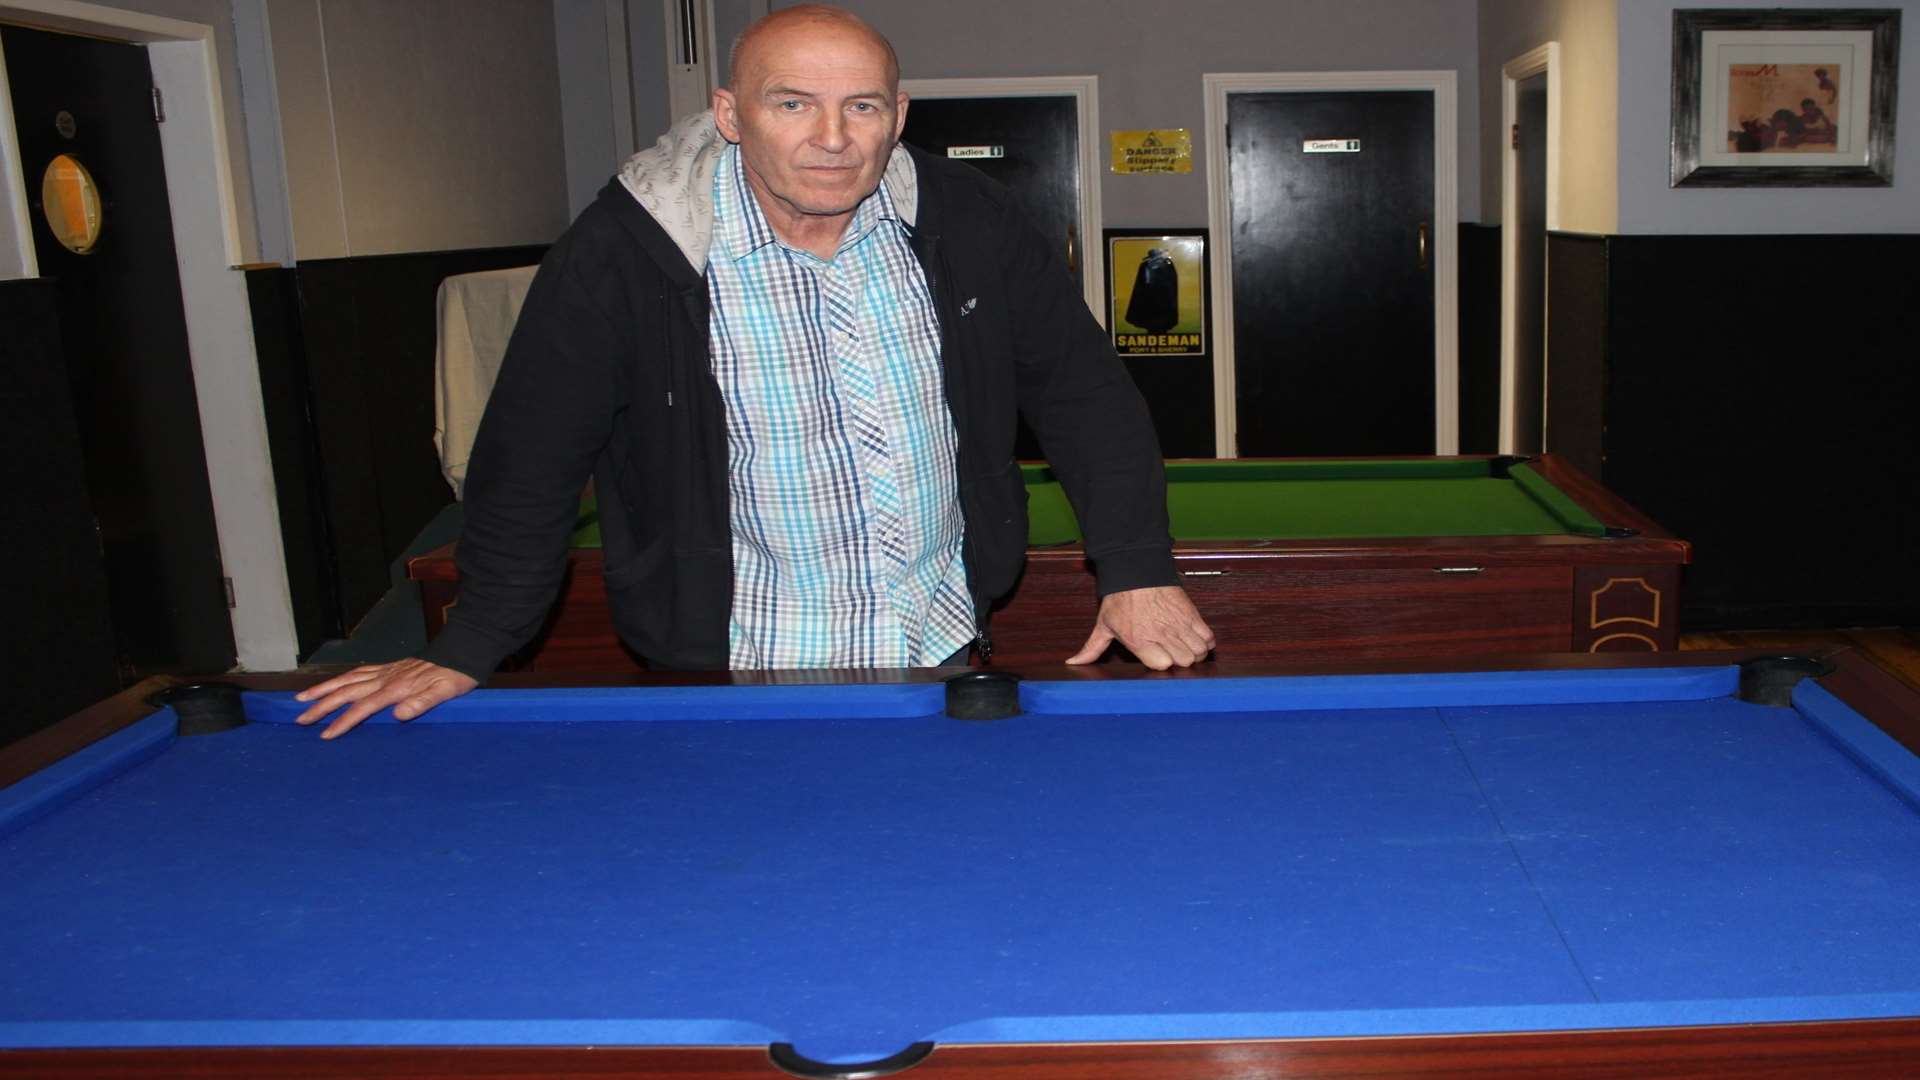 Landlord Chris Prime at the pool tables where the fight broke out